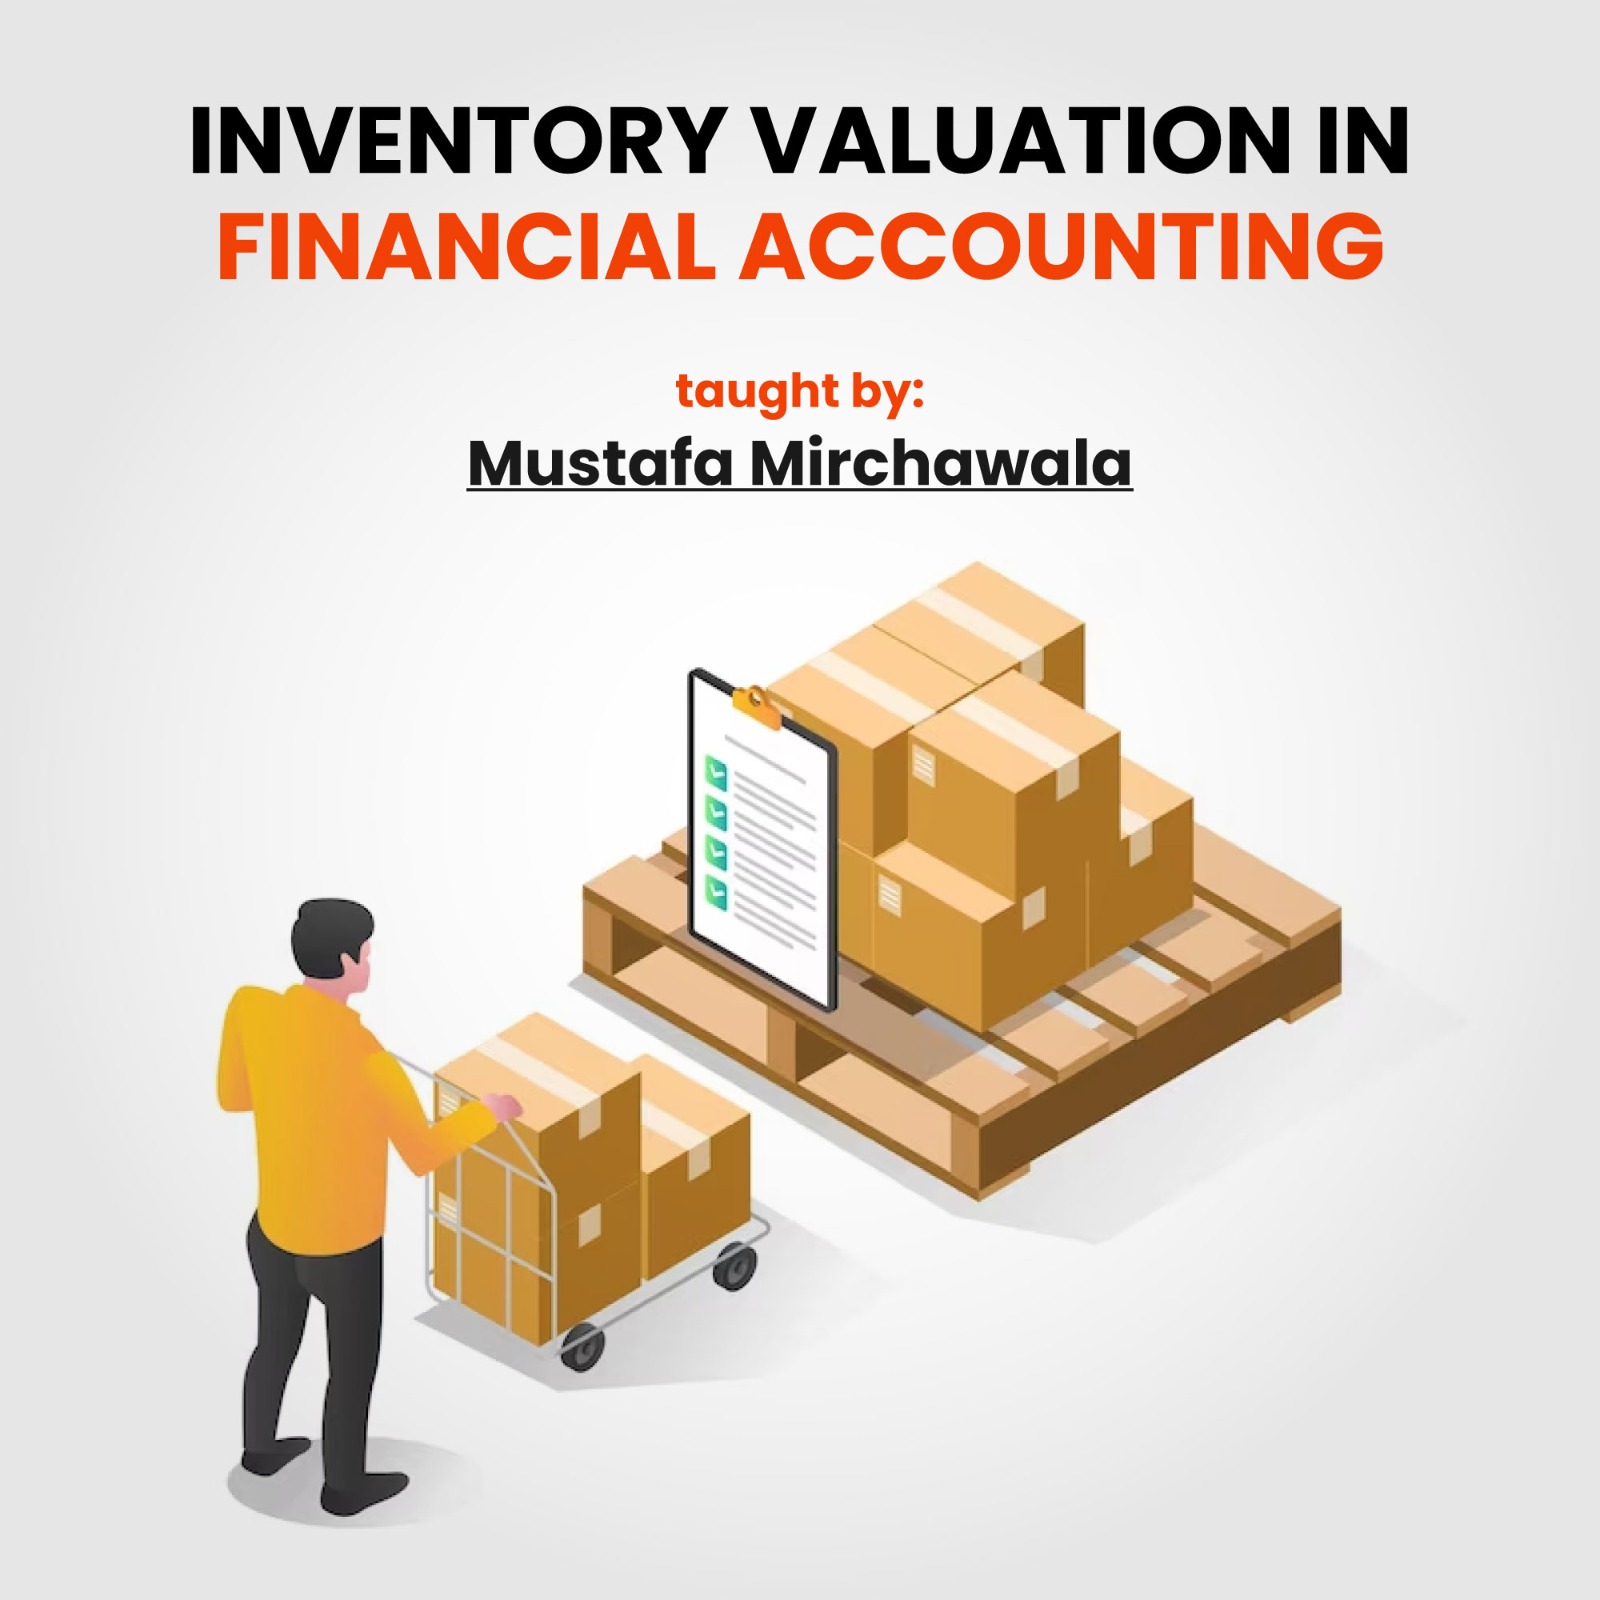 Theories of inventory valuation in financial accounting